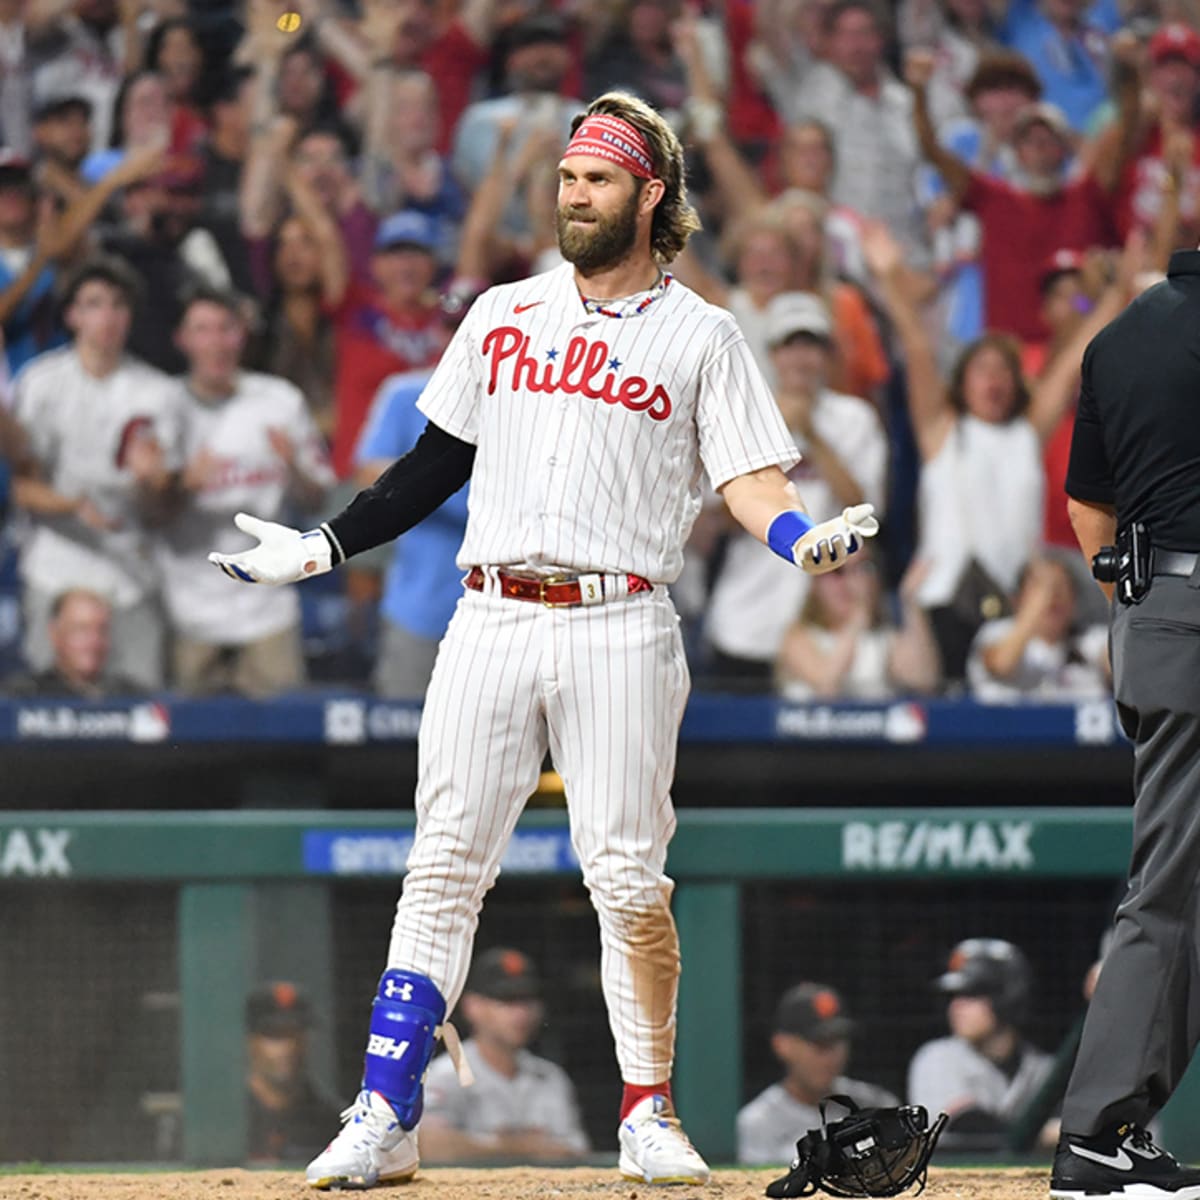 Bryce Harper Had Perfect Celebration After Hitting Inside-the-Park Home Run  - Sports Illustrated